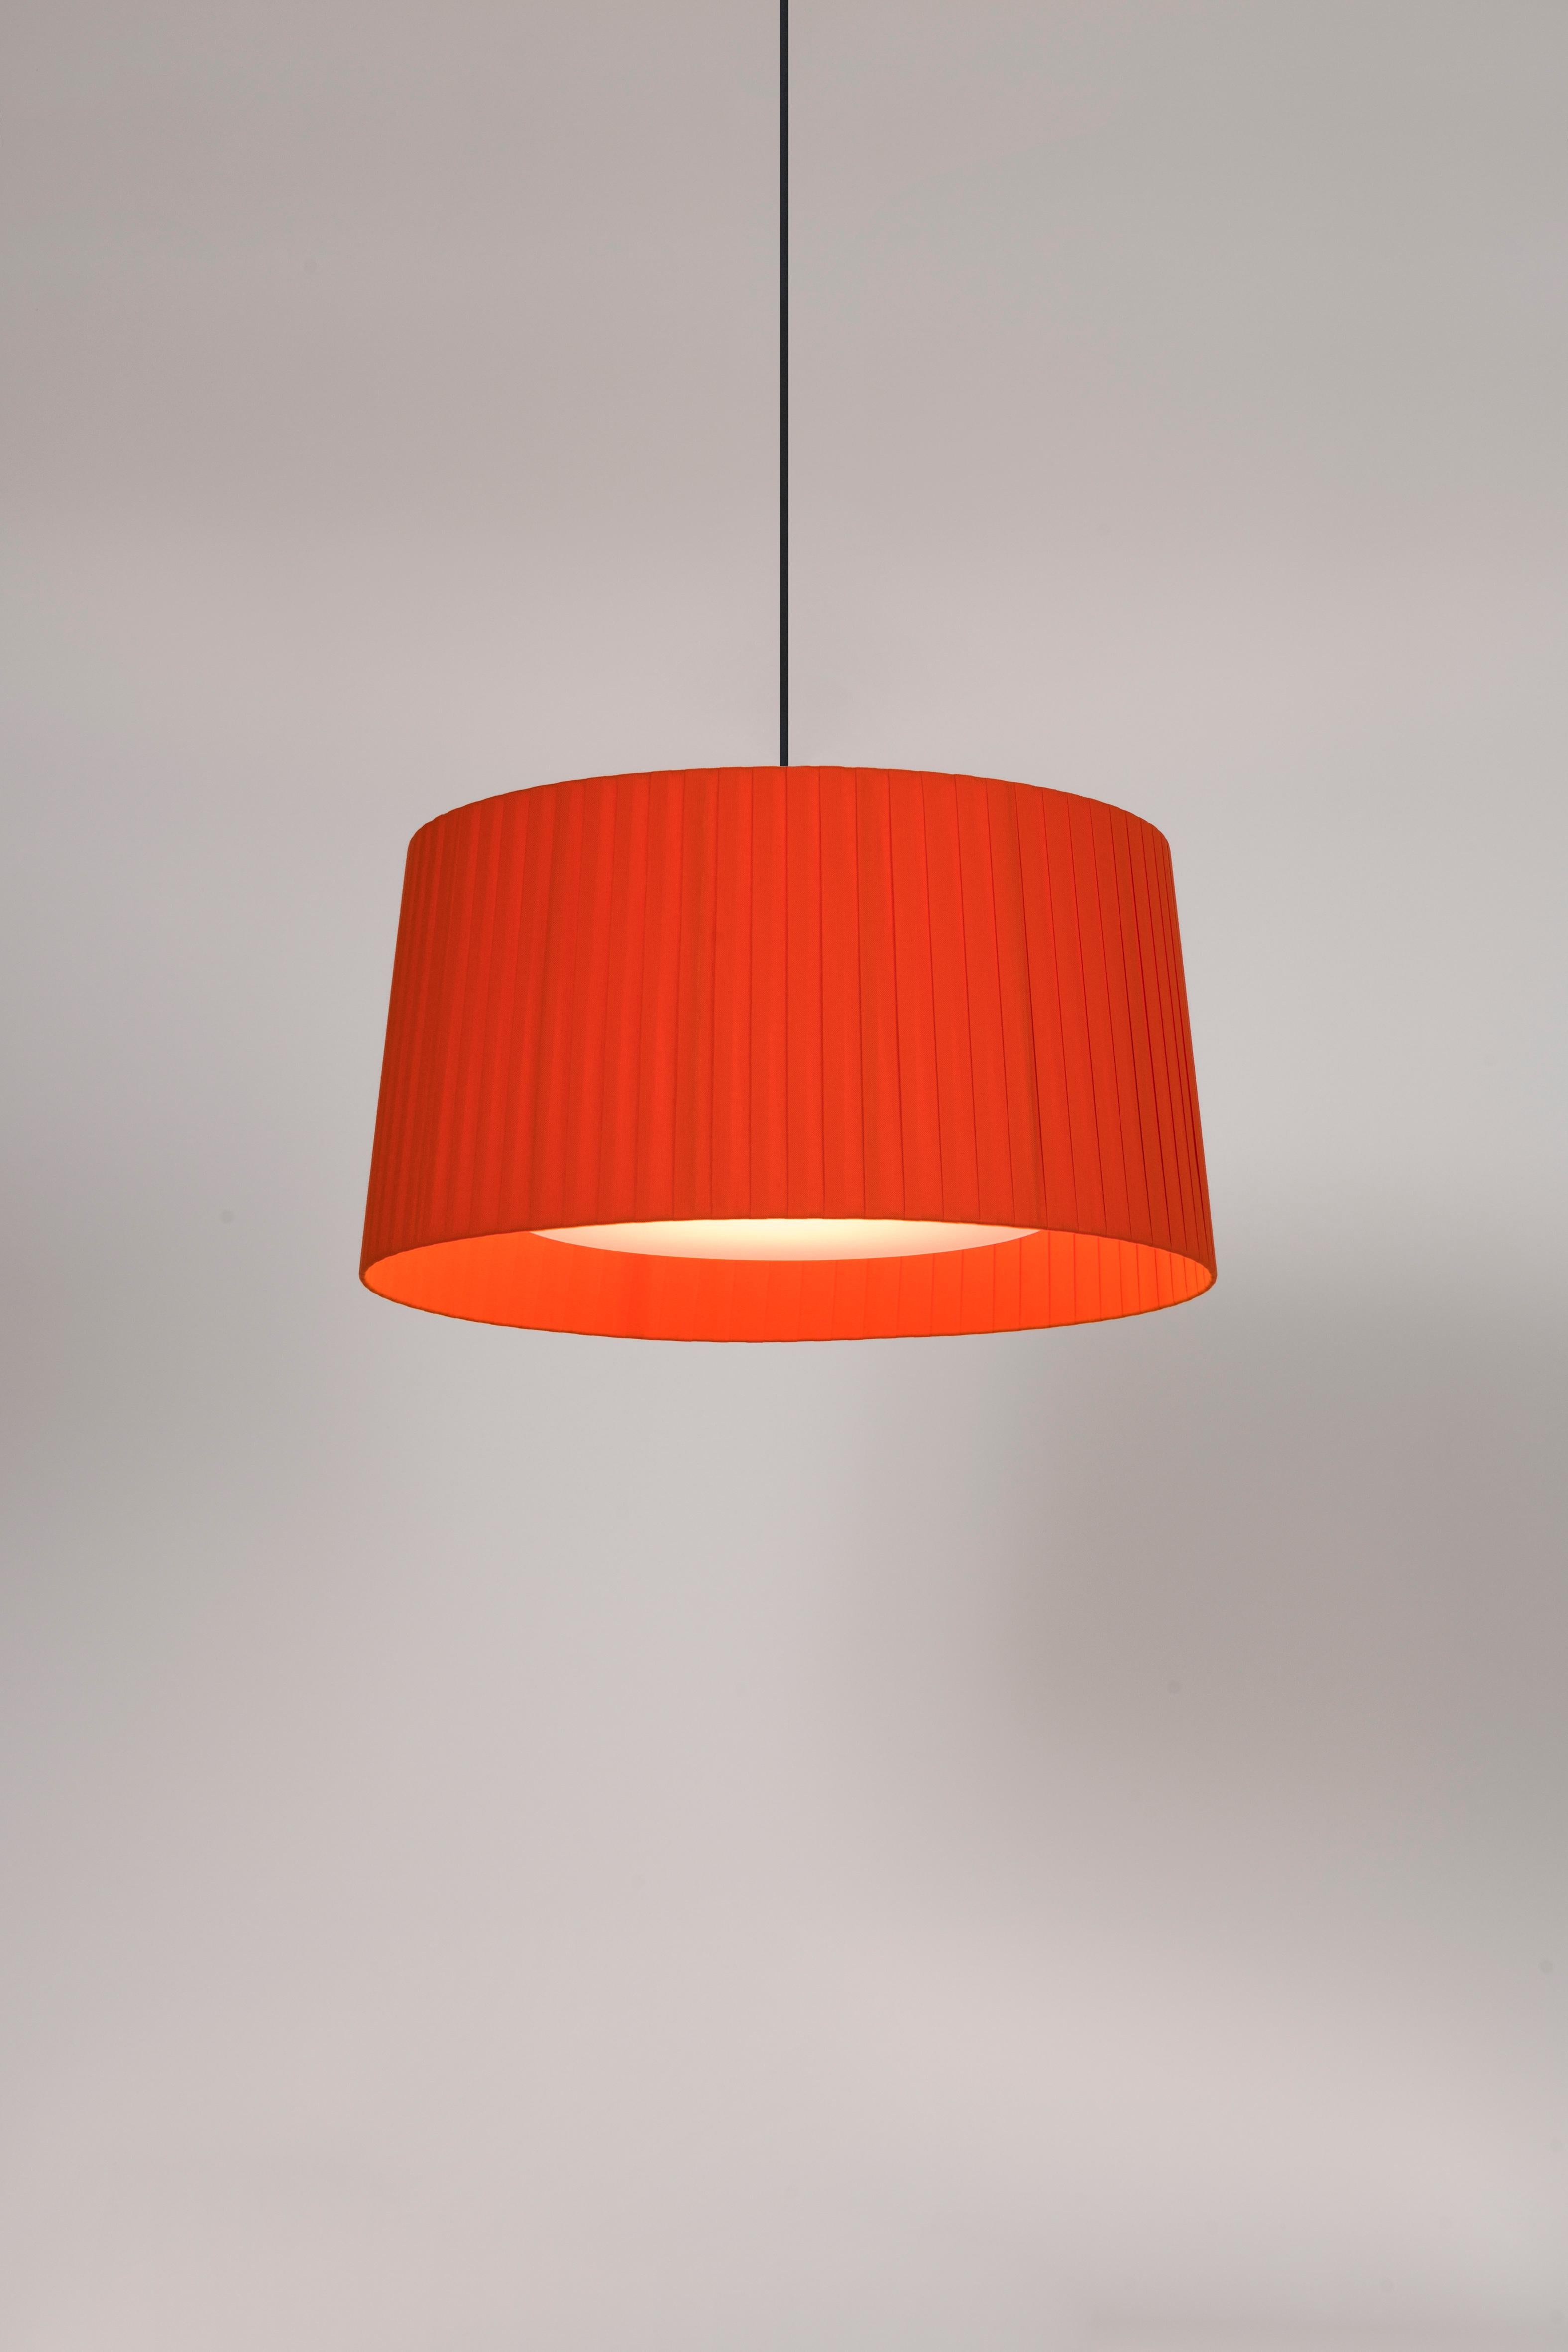 Mustard GT5 Pendant Lamp by Santa & Cole For Sale 1